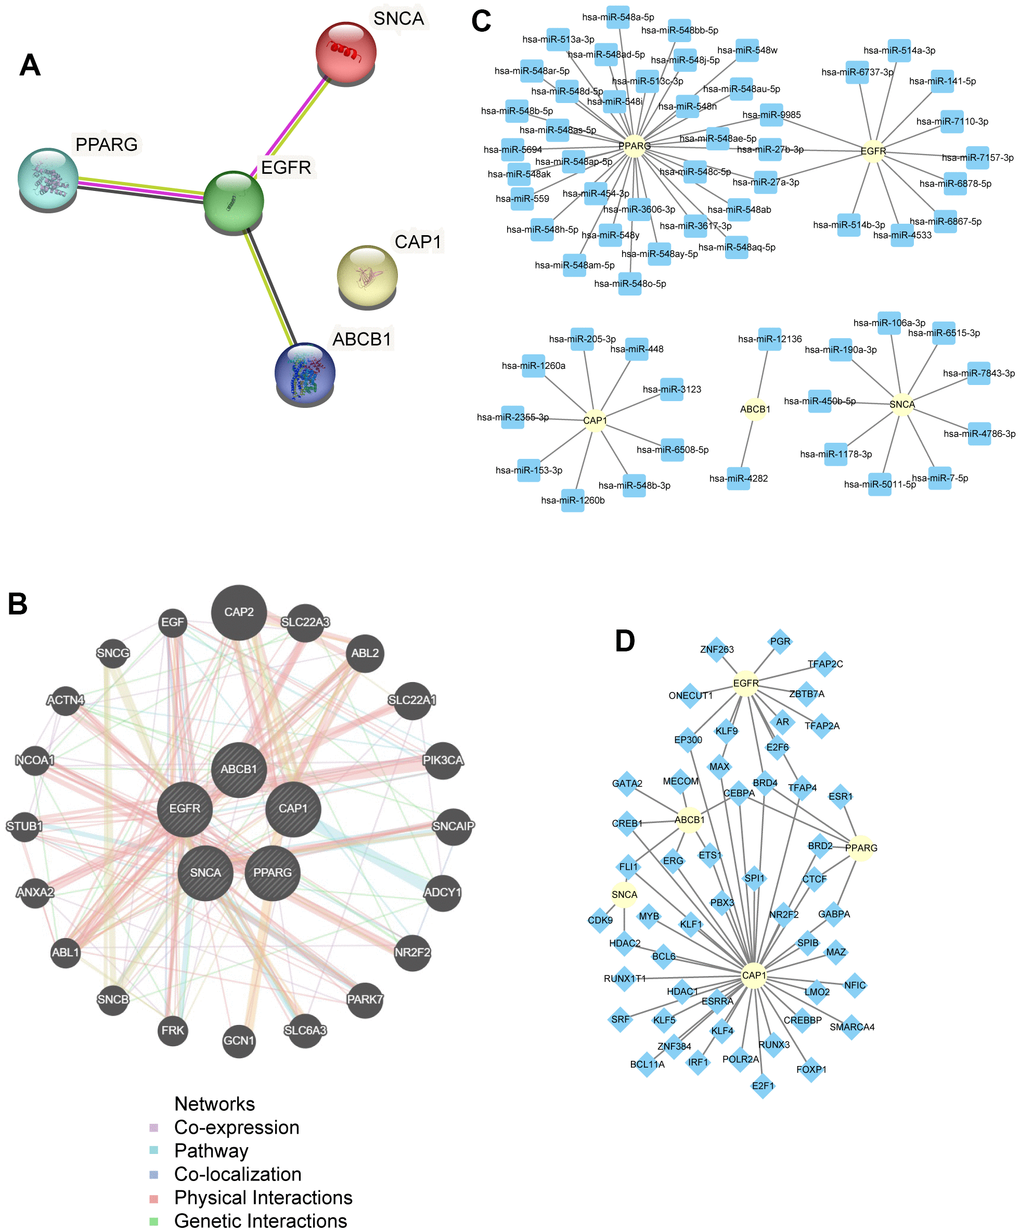 PPI network analysis. (A) PPI network of hub genes. (B) PPI network of functionally similar genes analysis in Hub genes. Black circles with white slashes represent the input hub genes, and other black circles without white slashes represent predicted functionally similar genes; red lines represent physical interactions among genes, purple lines represent co-expression relationships among genes, yellow lines represent shared protein domains among genes, blue lines represent co-localization relationships among genes, and green lines represent genetic interactions among genes. (C) An interaction network of mRNA-miRNA in hub genes. The yellow circle represents mRNA; the blue square represents miRNA. (D) An interaction network of mRNA-TFs in hub genes. The yellow circle represents mRNA; the blue diamond shape represents TFs. PPI, protein-protein interaction; TF, Transcription Factor.